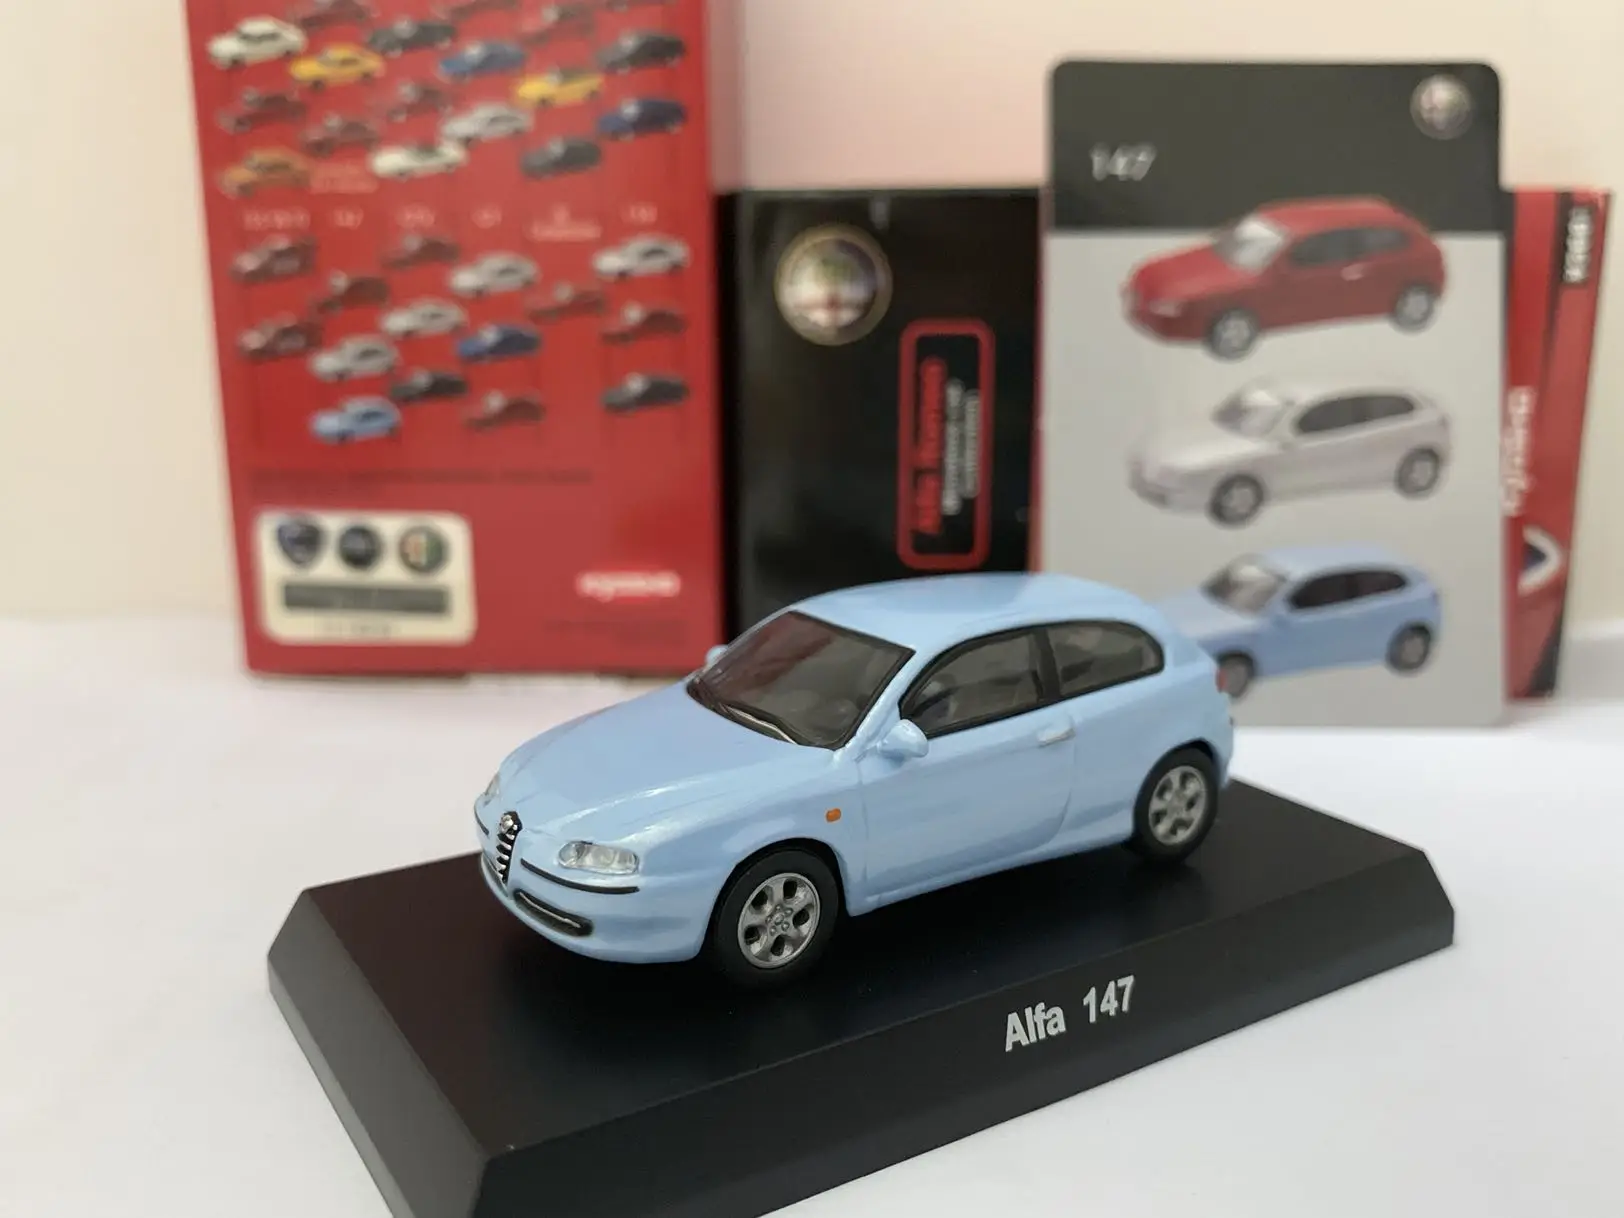 

1/64 KYOSHO Alfa Romeo 147 Collection of die-cast alloy car decoration model toys